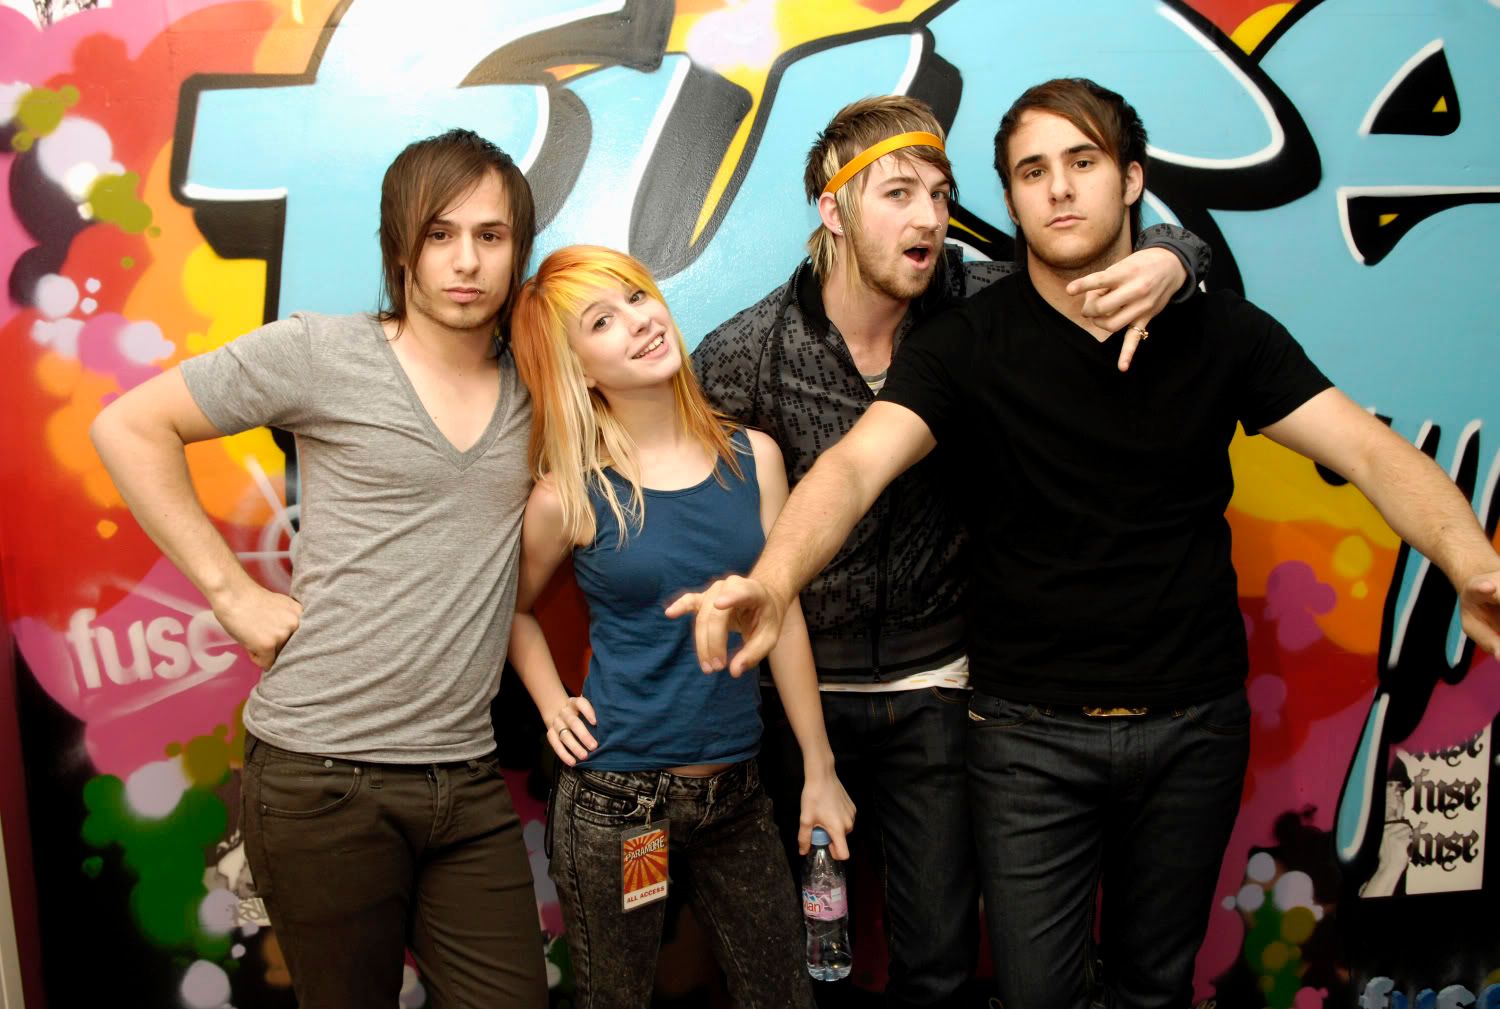 Paramore05-Cityintheclouds.jpg image by CityInTheClouds